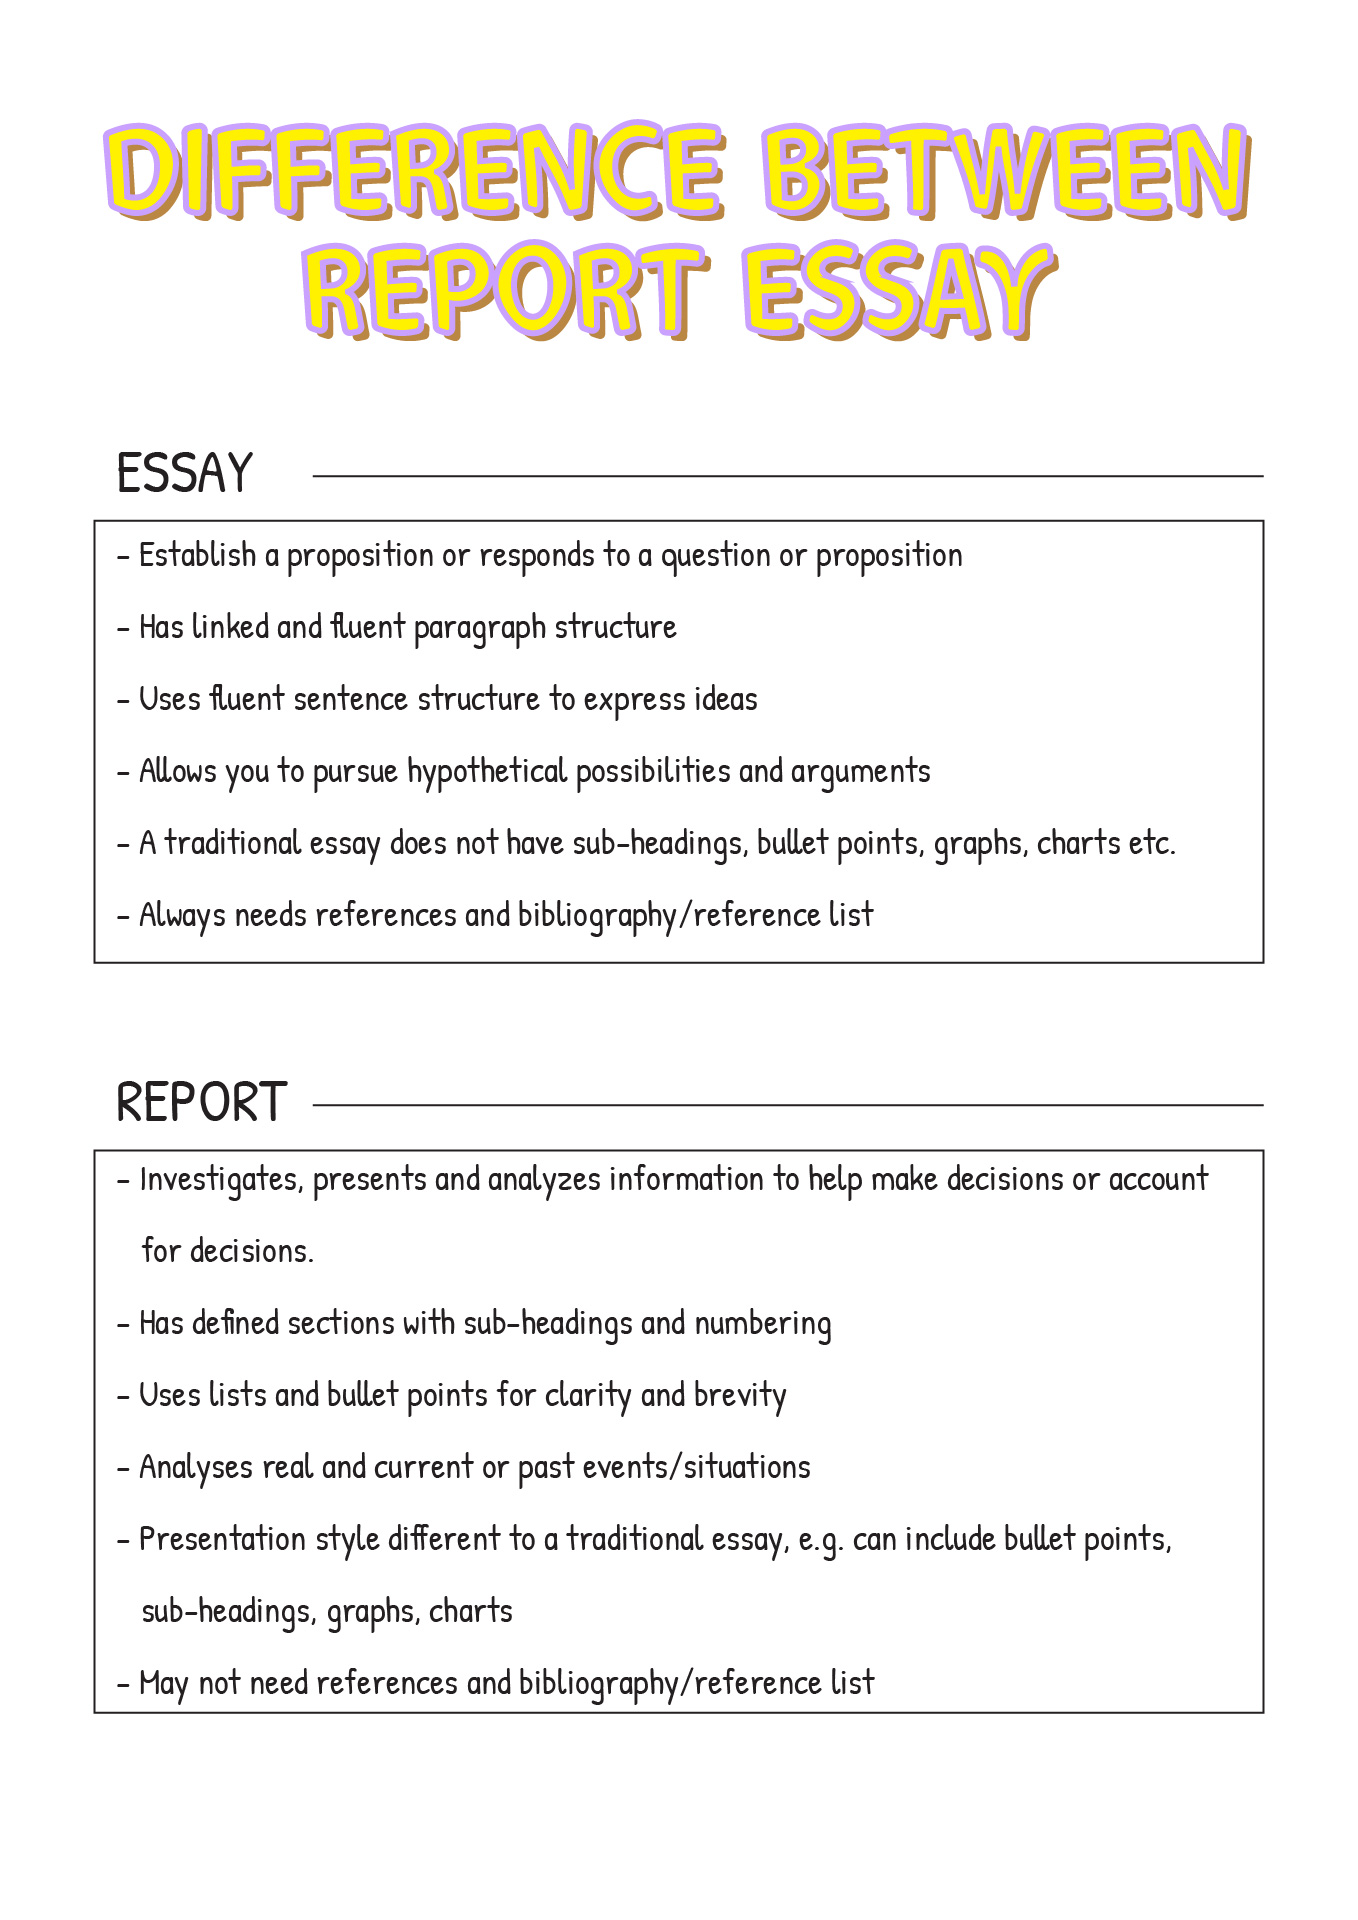 Difference Between Report Essay